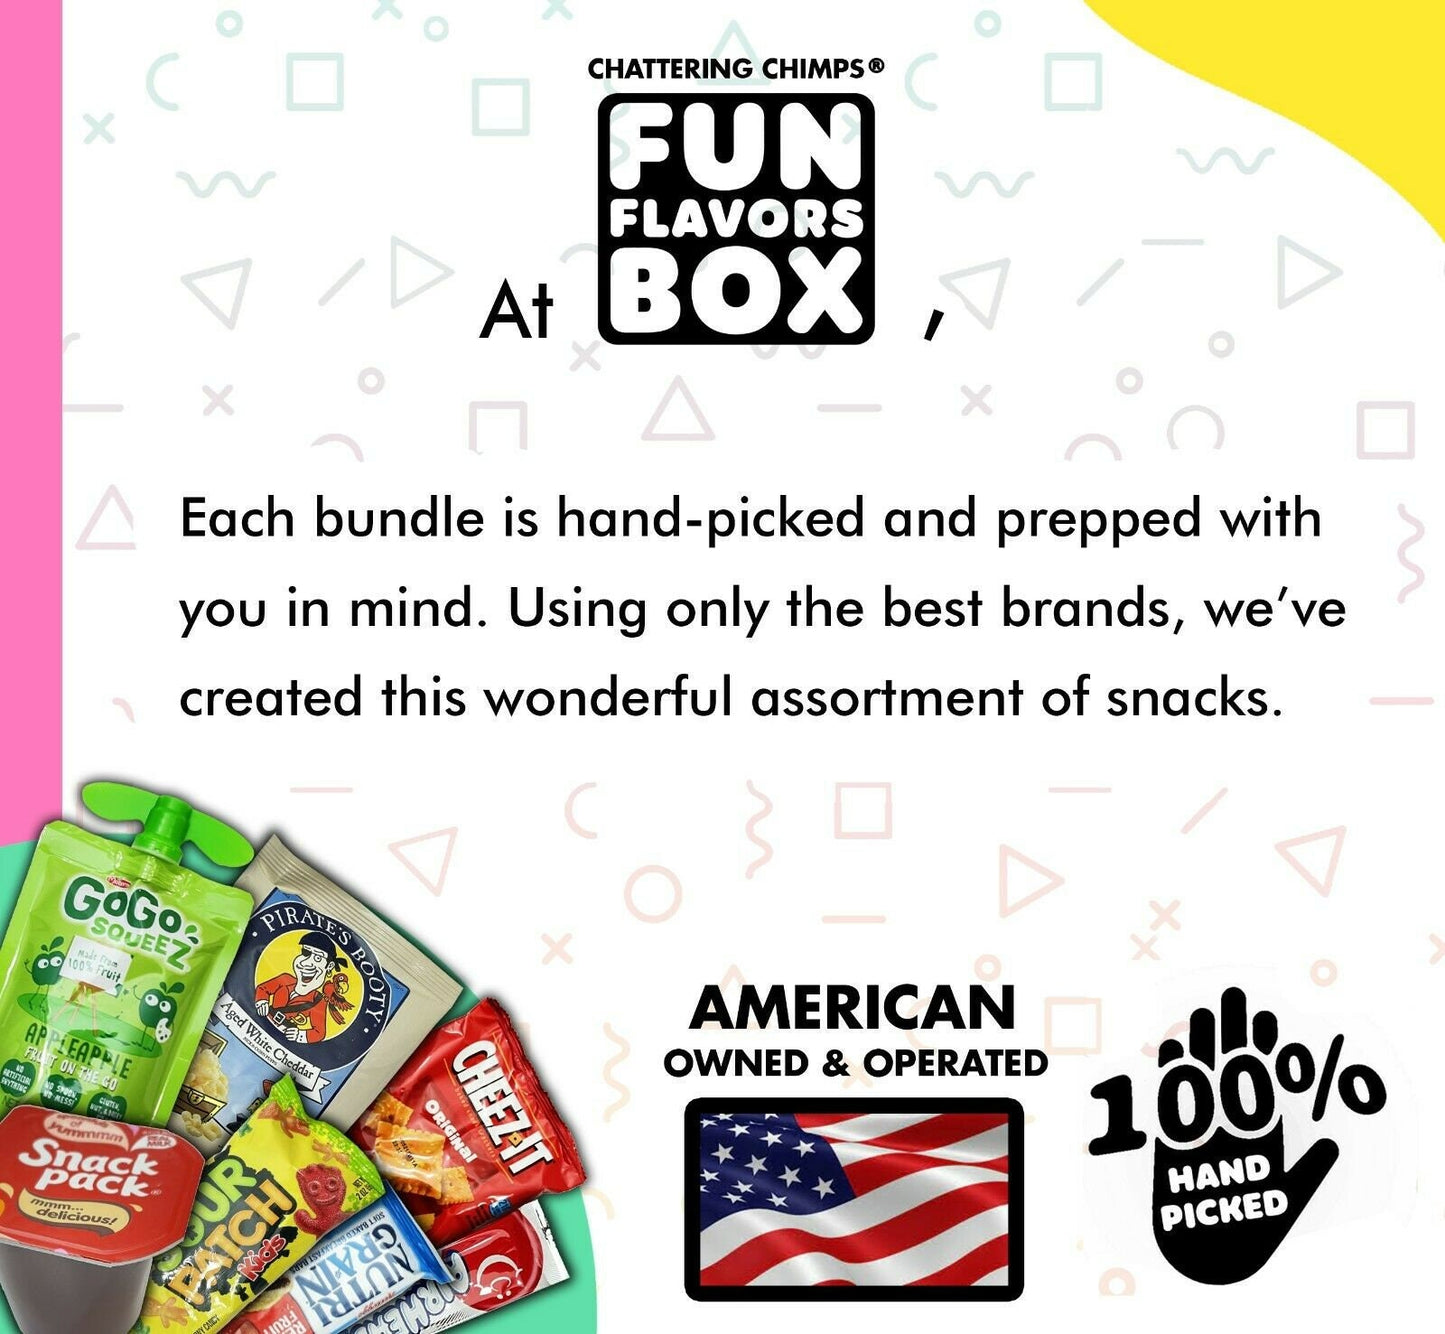 Each Fun Flavors Box snack bundle is hand picked and prepped using the best brands and snacks